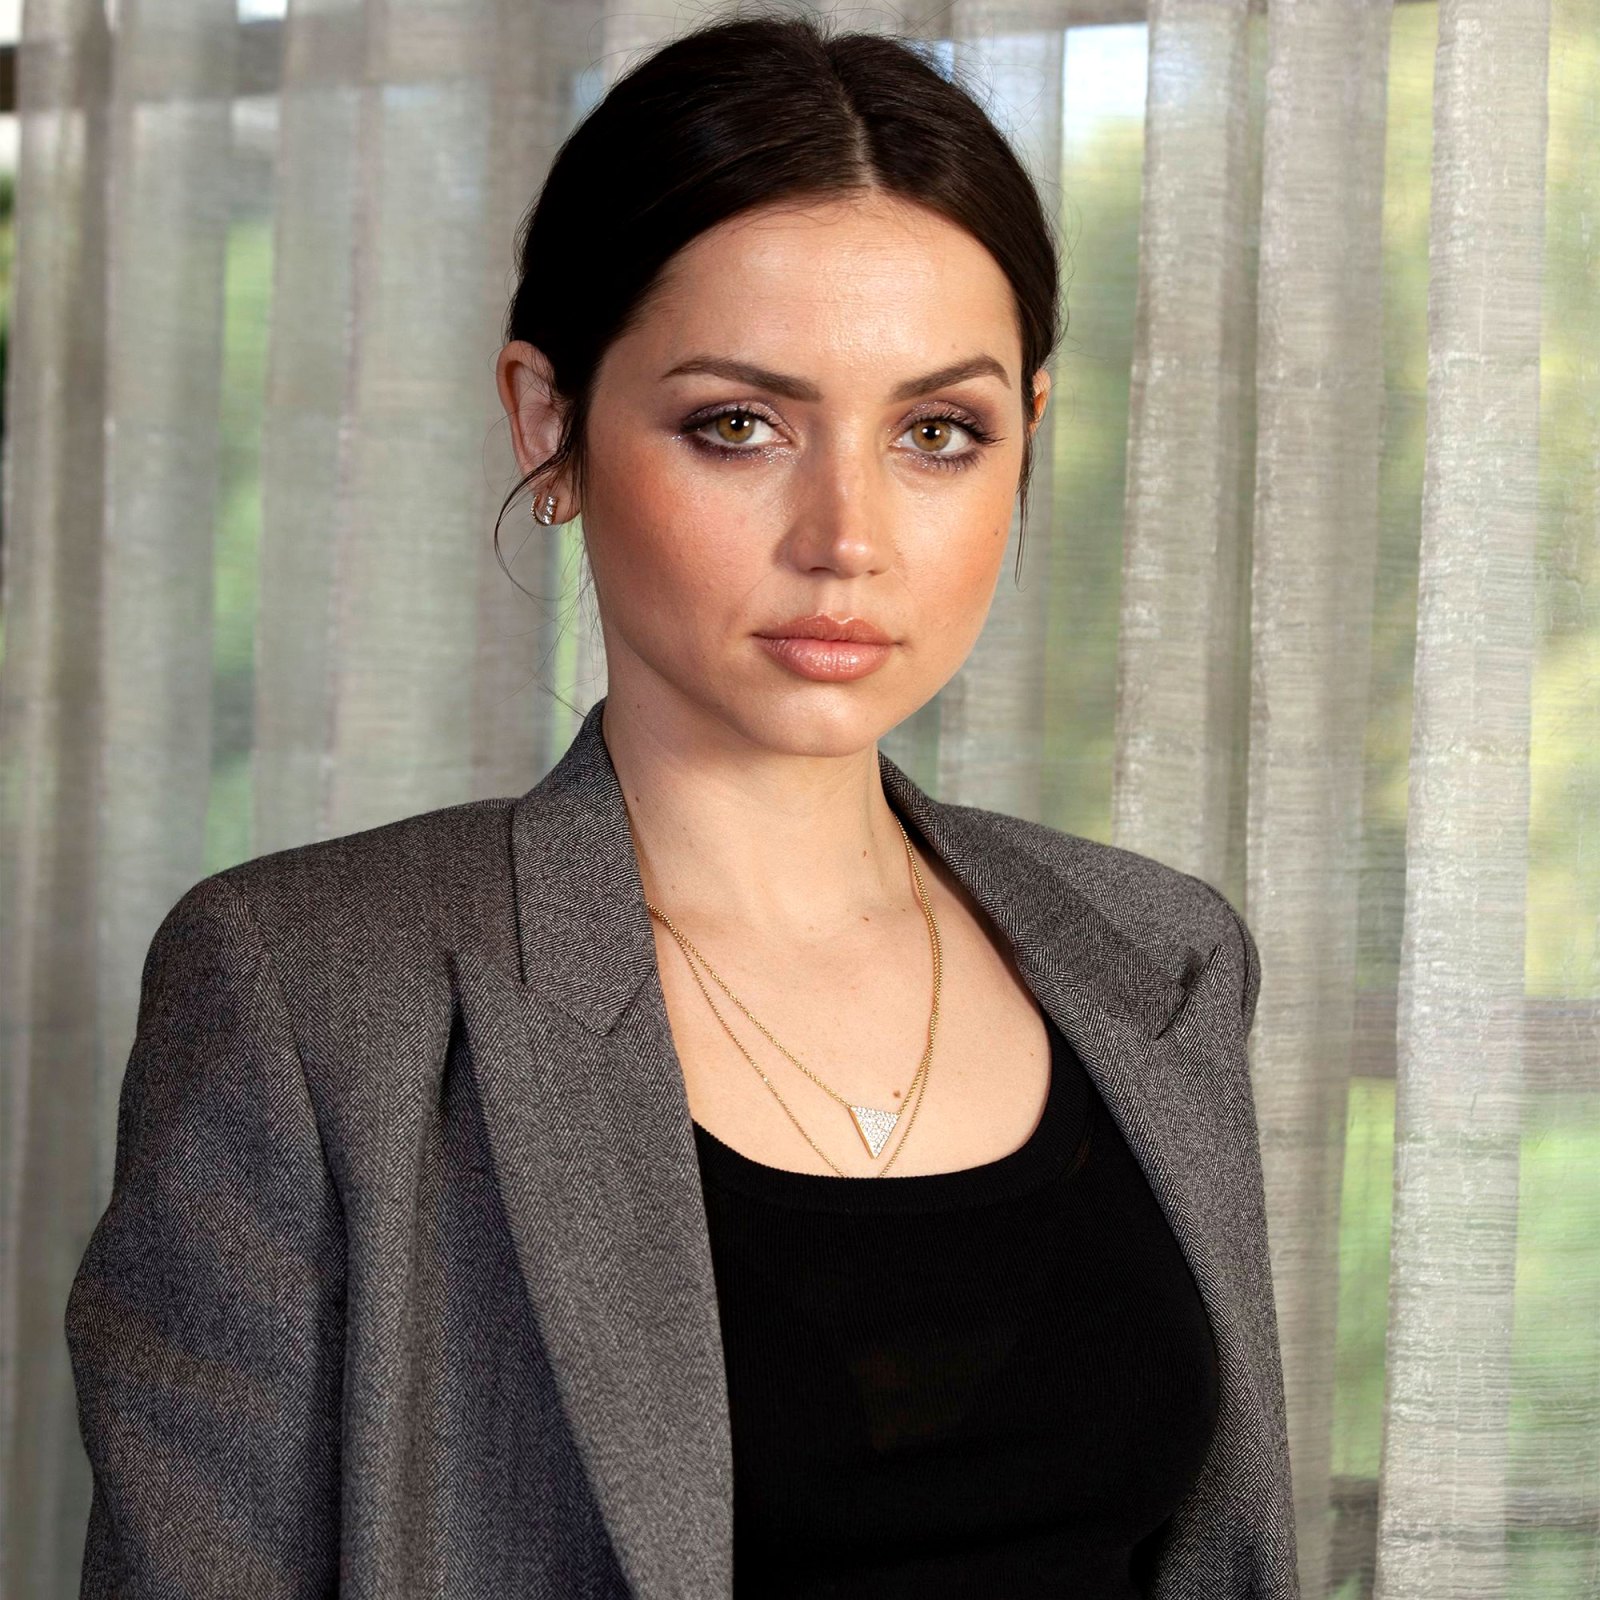 Ana de Armas ‘Didn’t Understand’ Why ‘Blonde’ Was Given NC-17 Rating